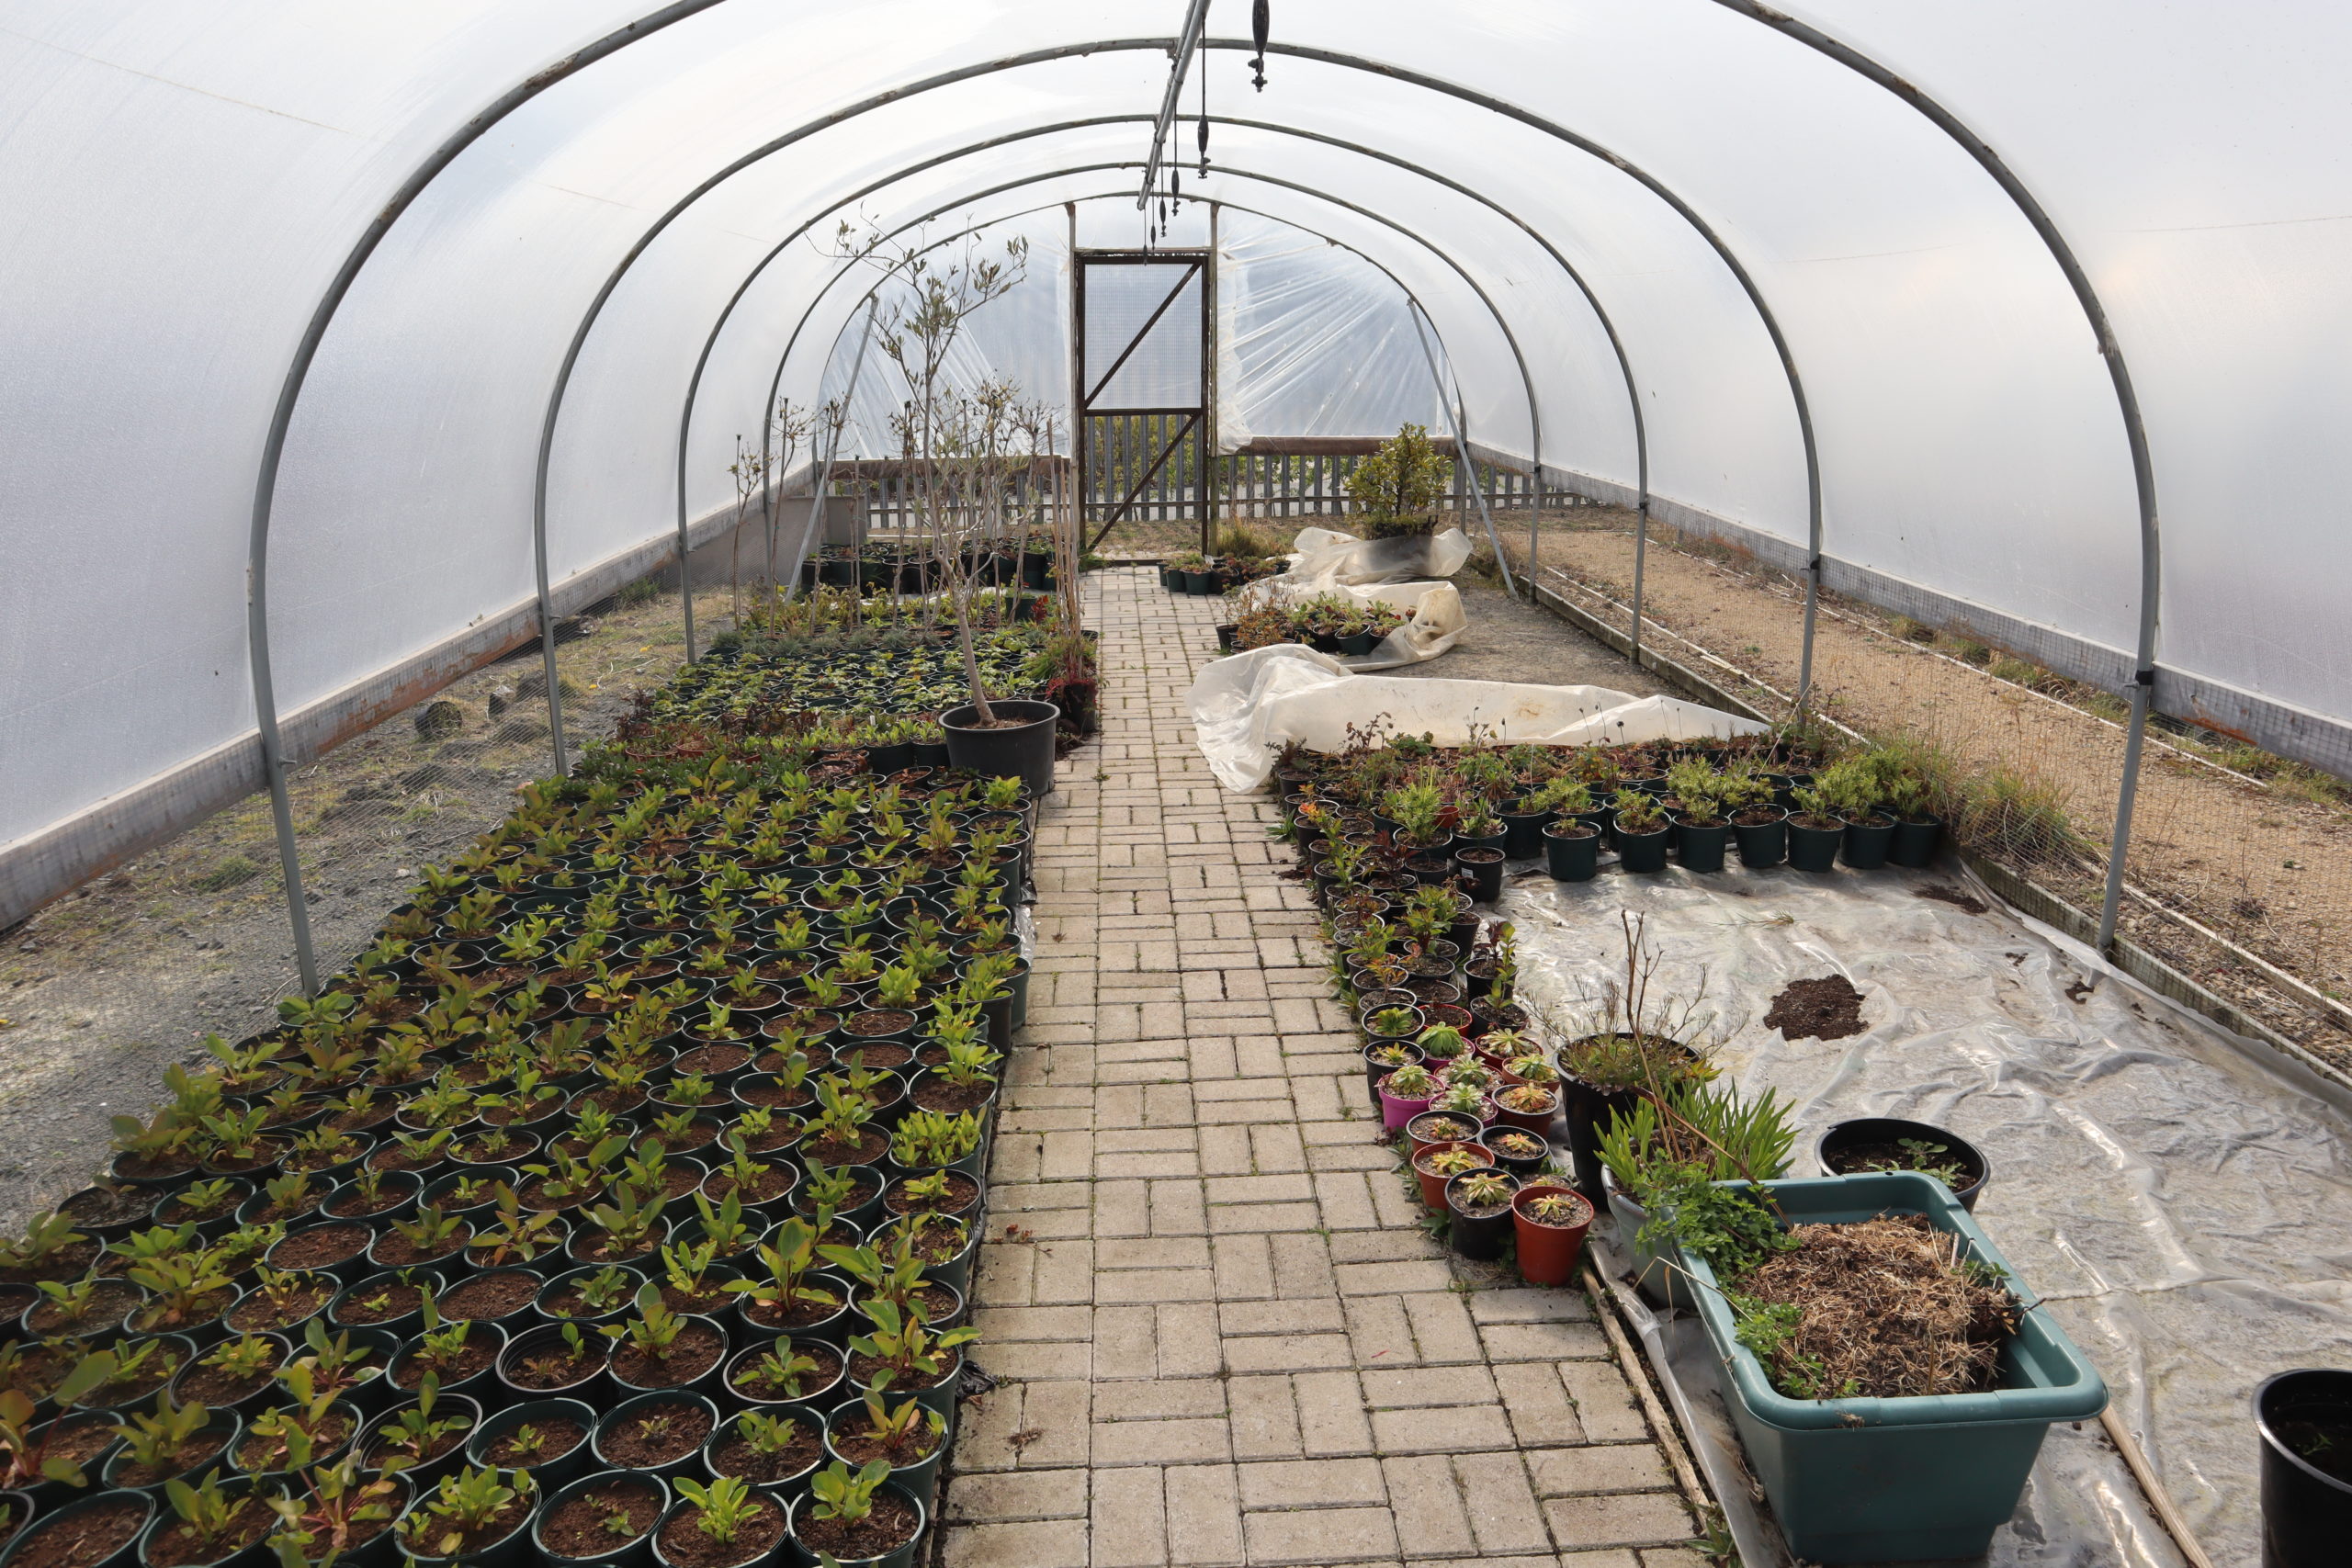 One of the polytunnels at Hopewood Park used by the Occupational Therapy team to grow plants with patients.